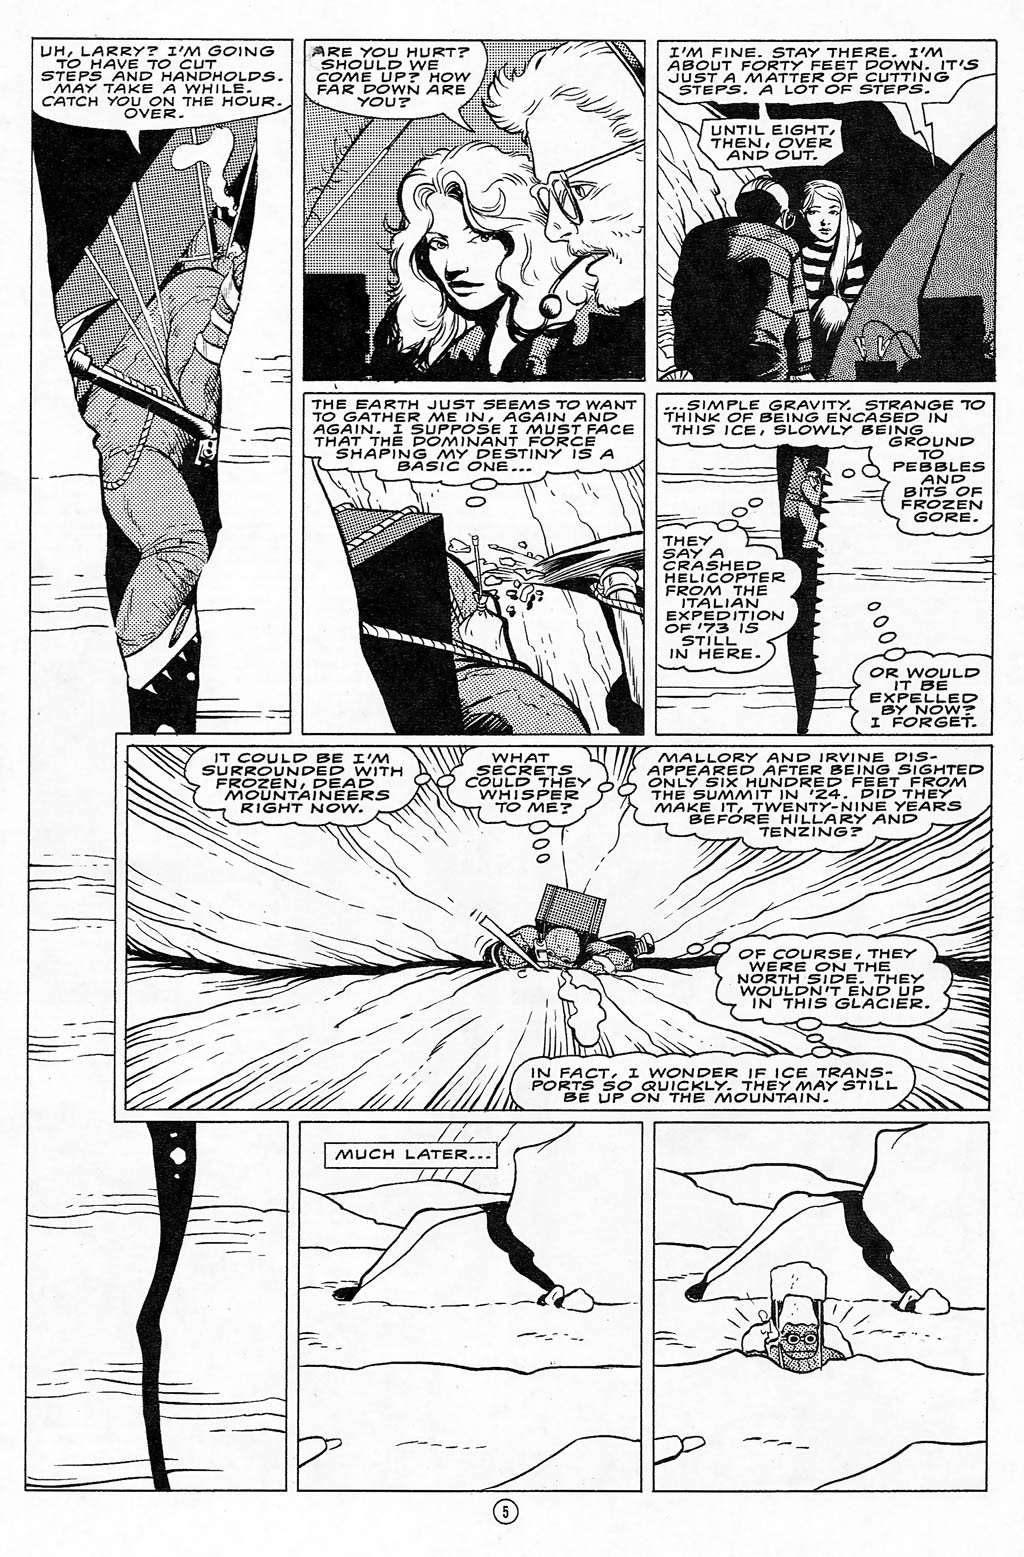 Concrete (1987) issue 9 - Page 7